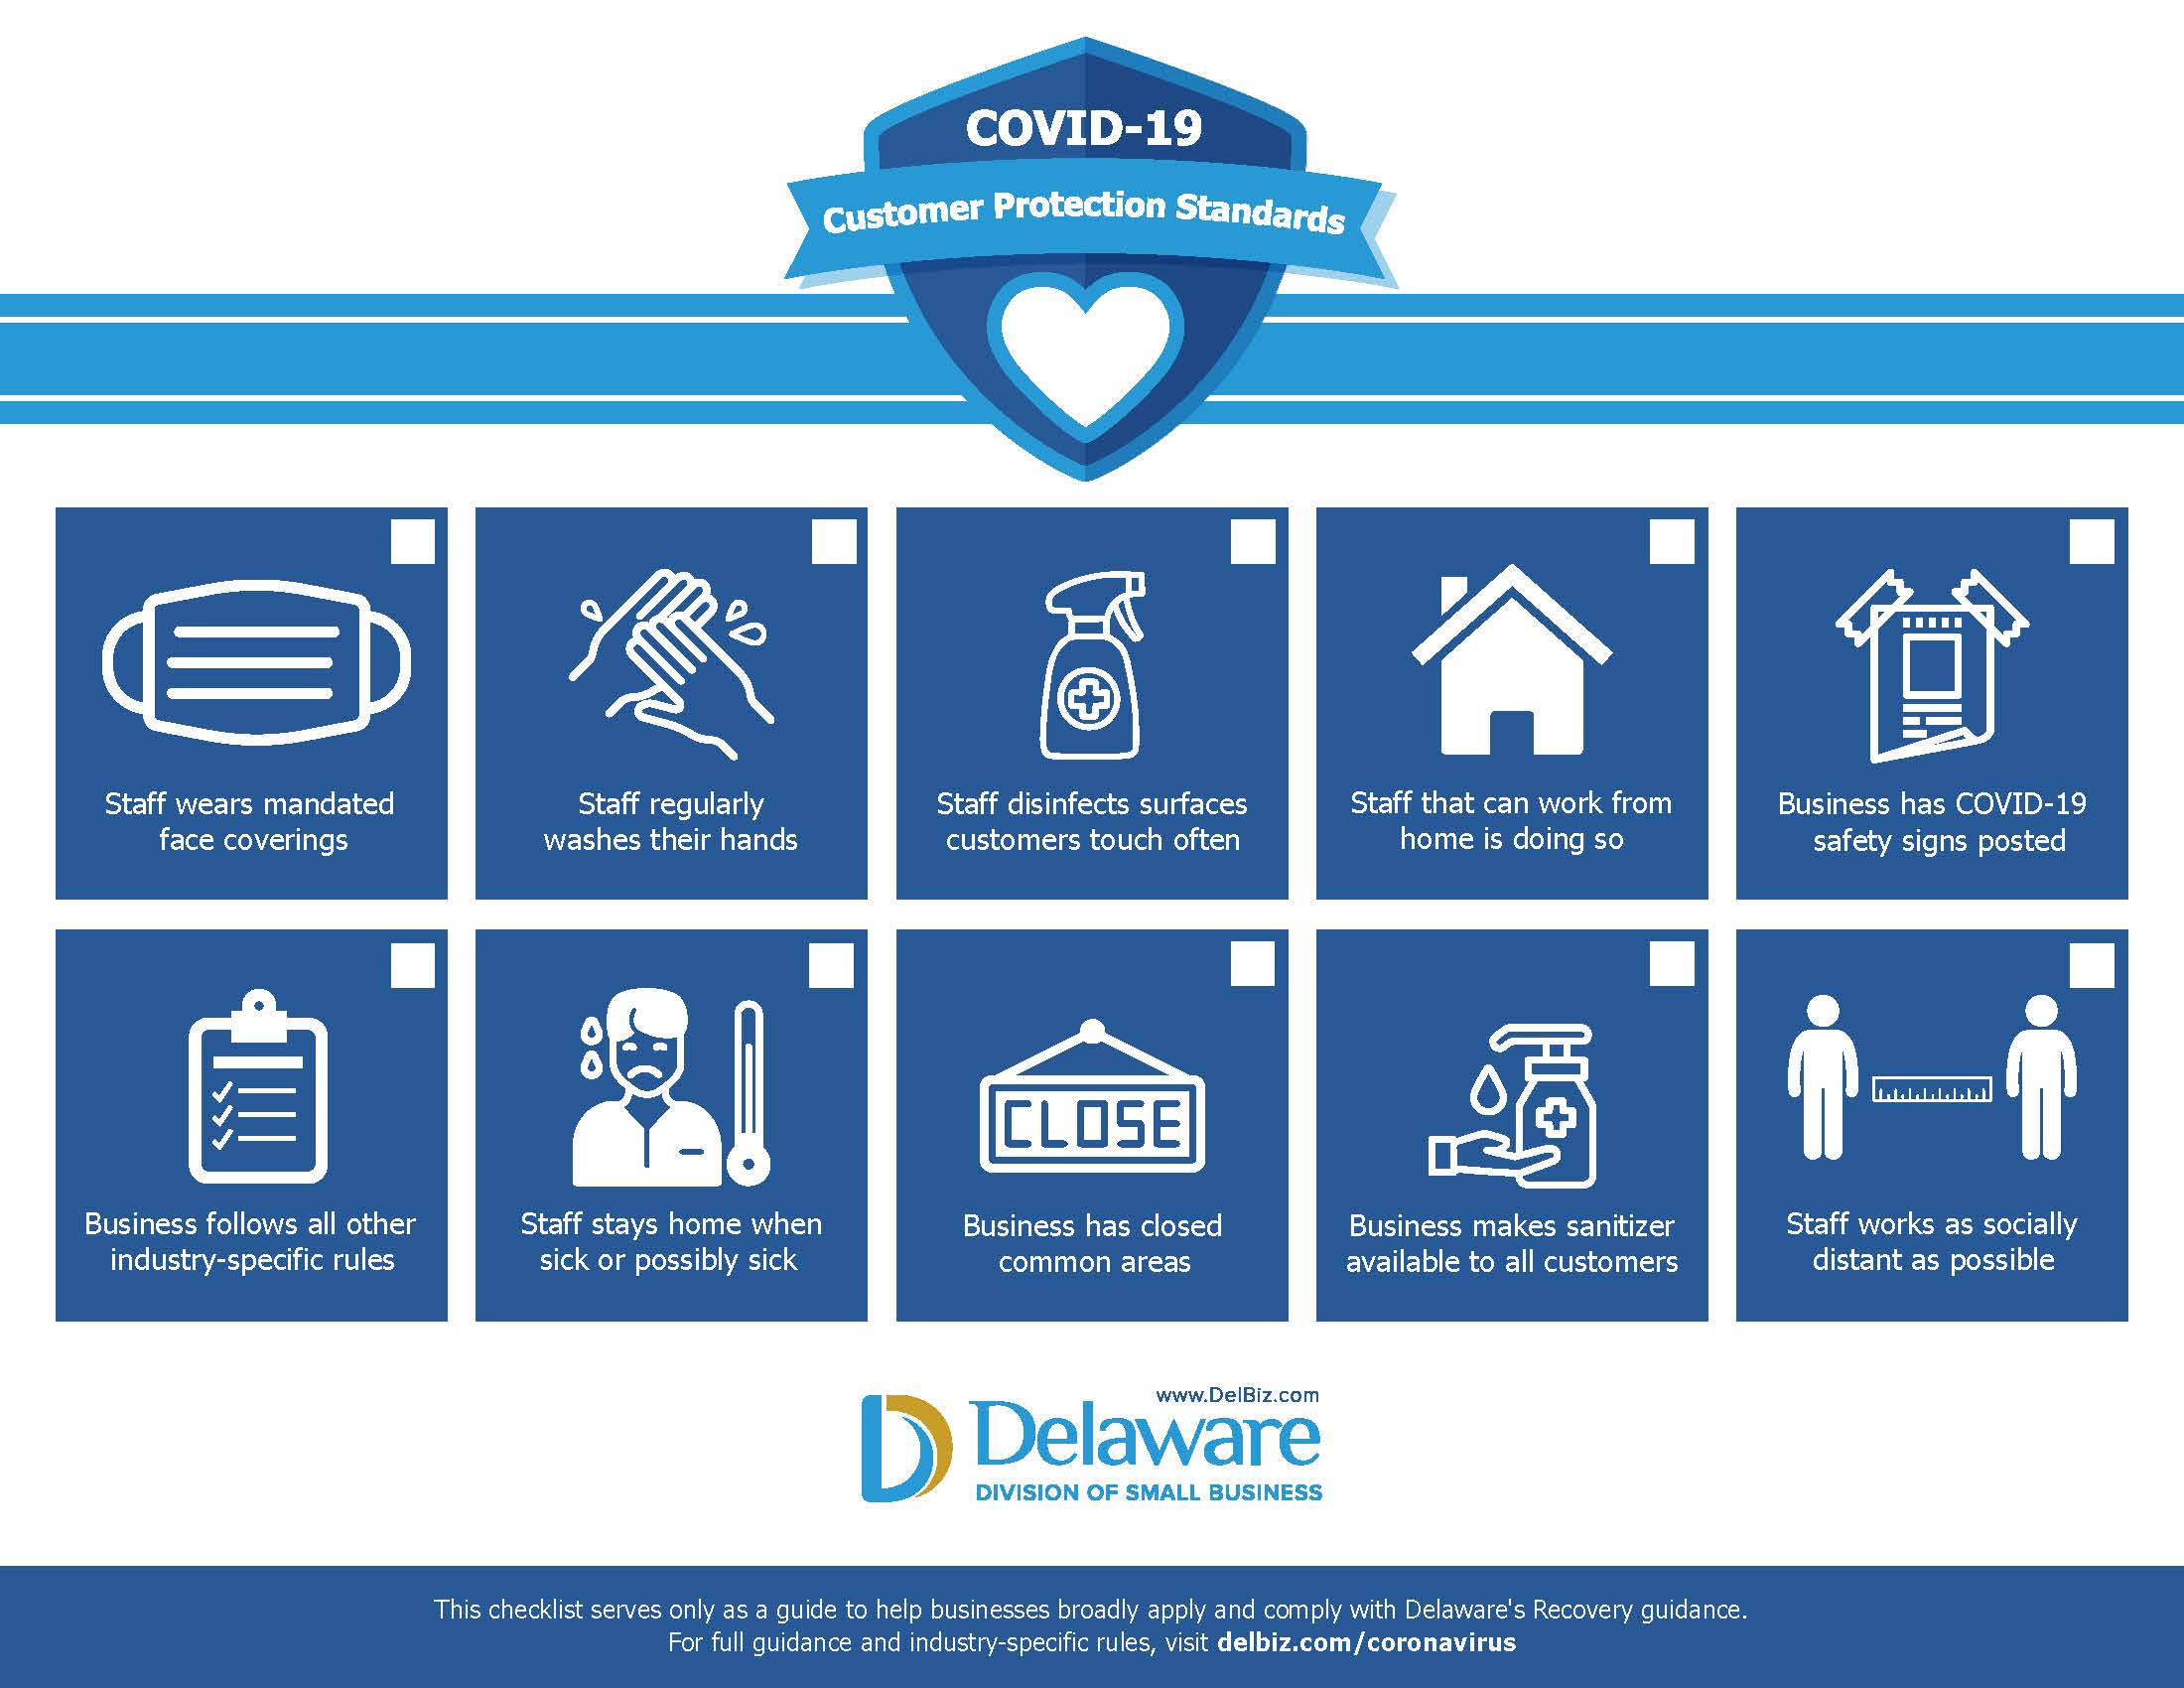 Image of COVID-19 Customer Protection Standards including face coverings, washing hands, disinfecting surfaces and other health measures.